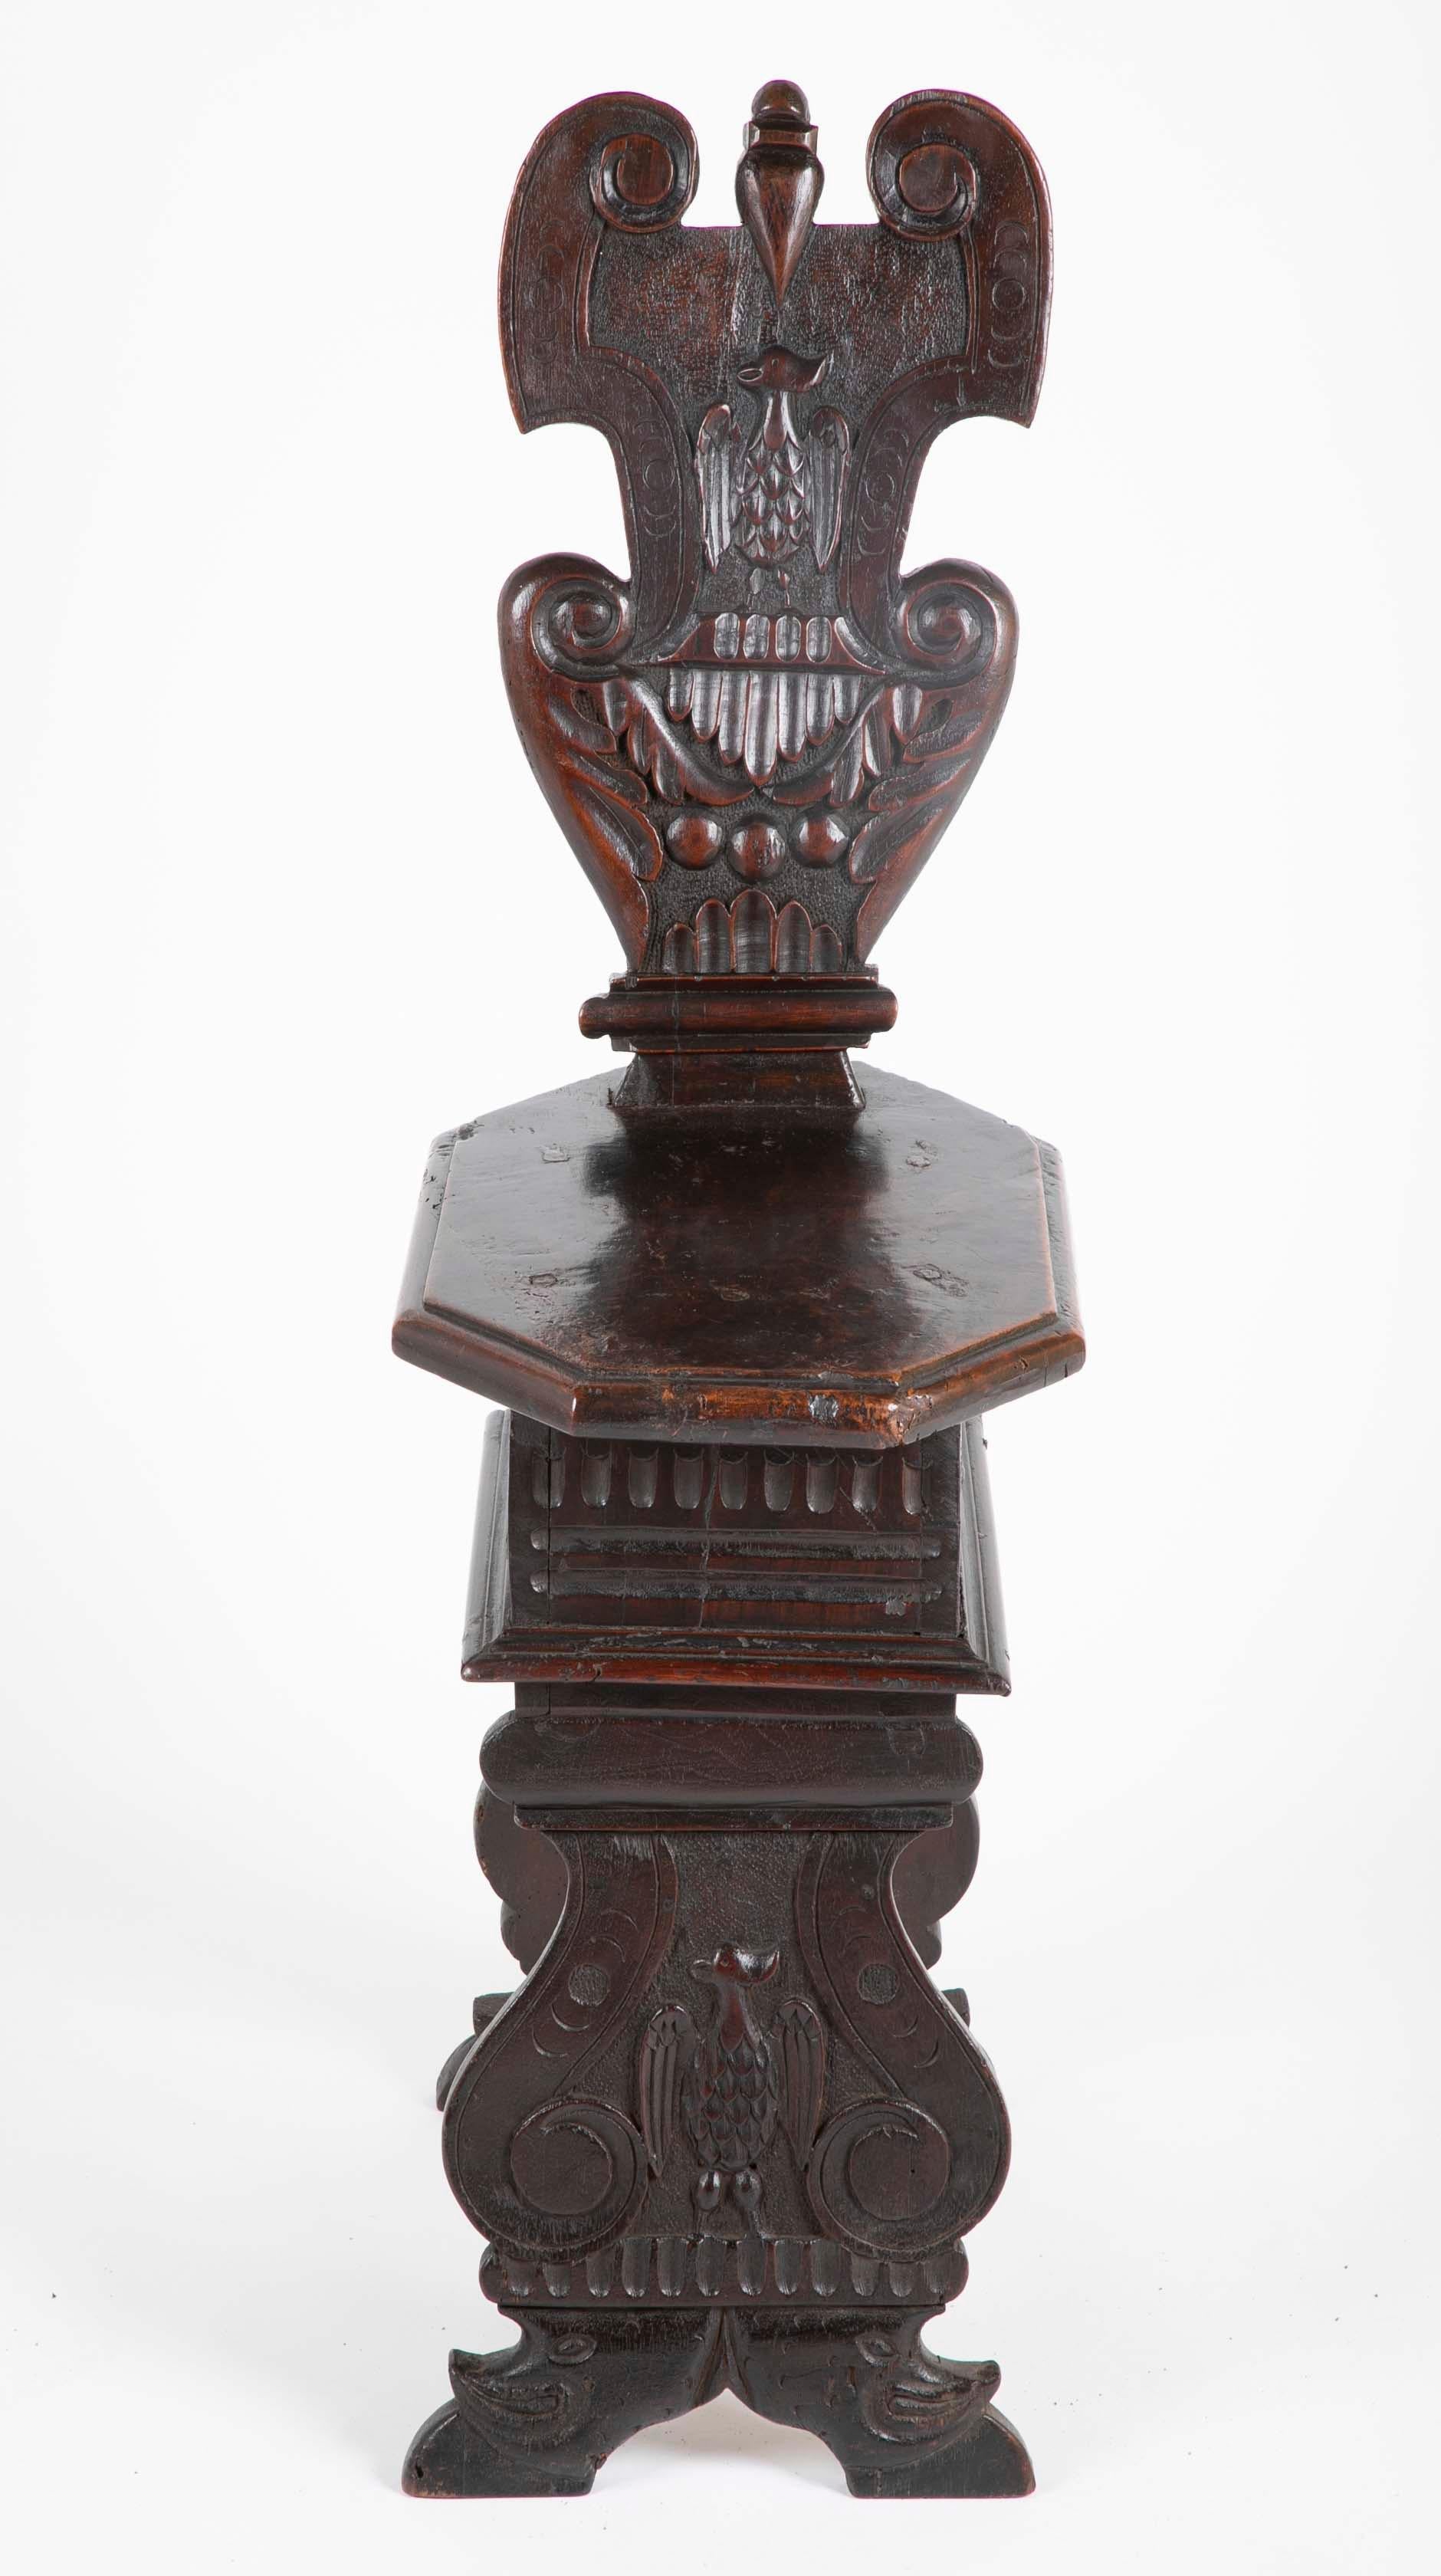 A late 16th, early 17th century walnut sgabello, or hall chair with a cartouche shaped back carved with an eagle in relief. The octagonal seat above scrolled supports, also carved with the image of an eagle. This is the classic late Renaissance,